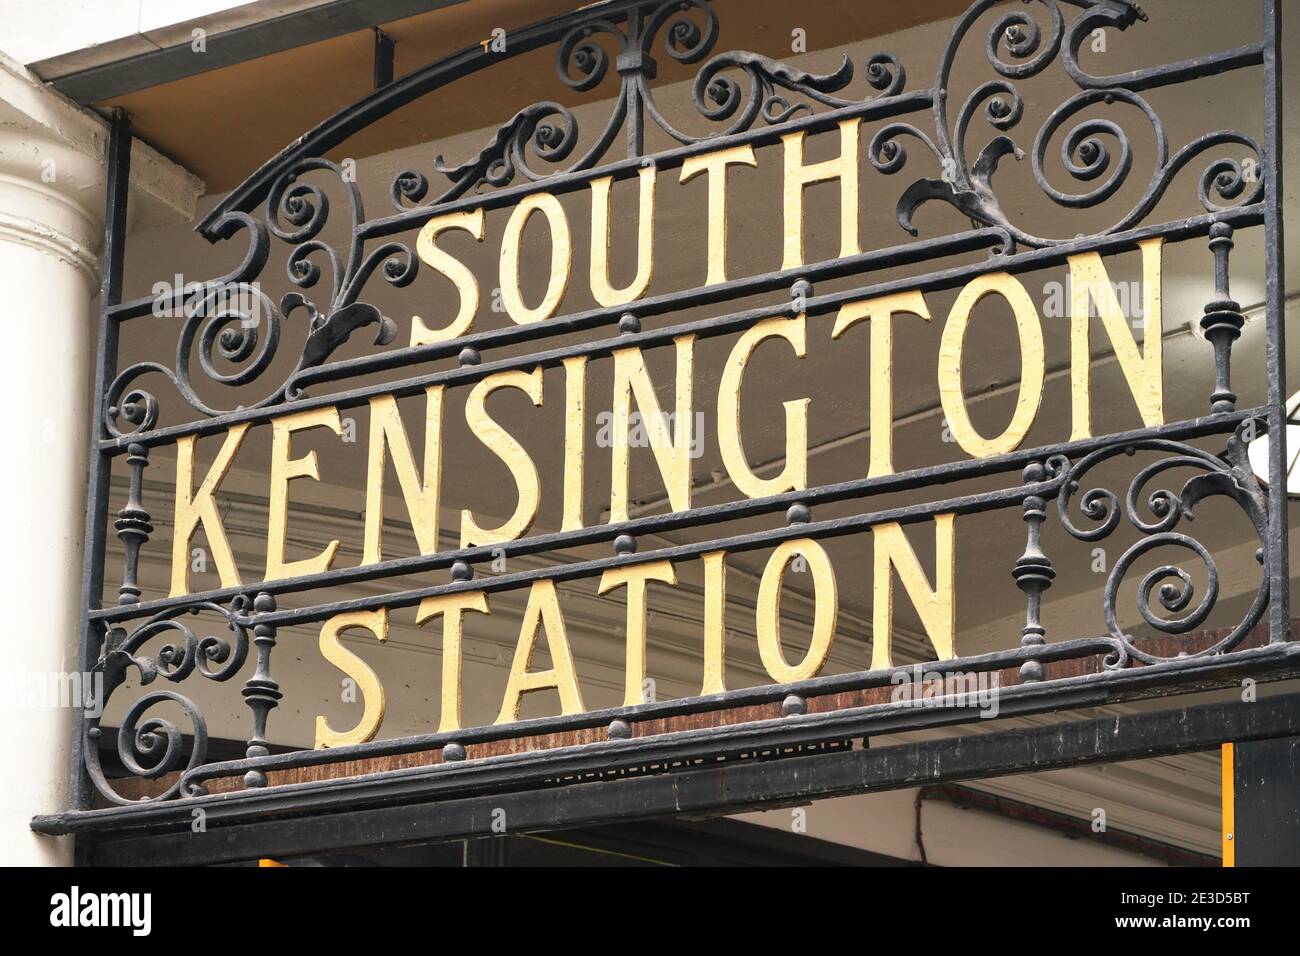 South Kensington station sign at the entrance to London underground station Stock Photo